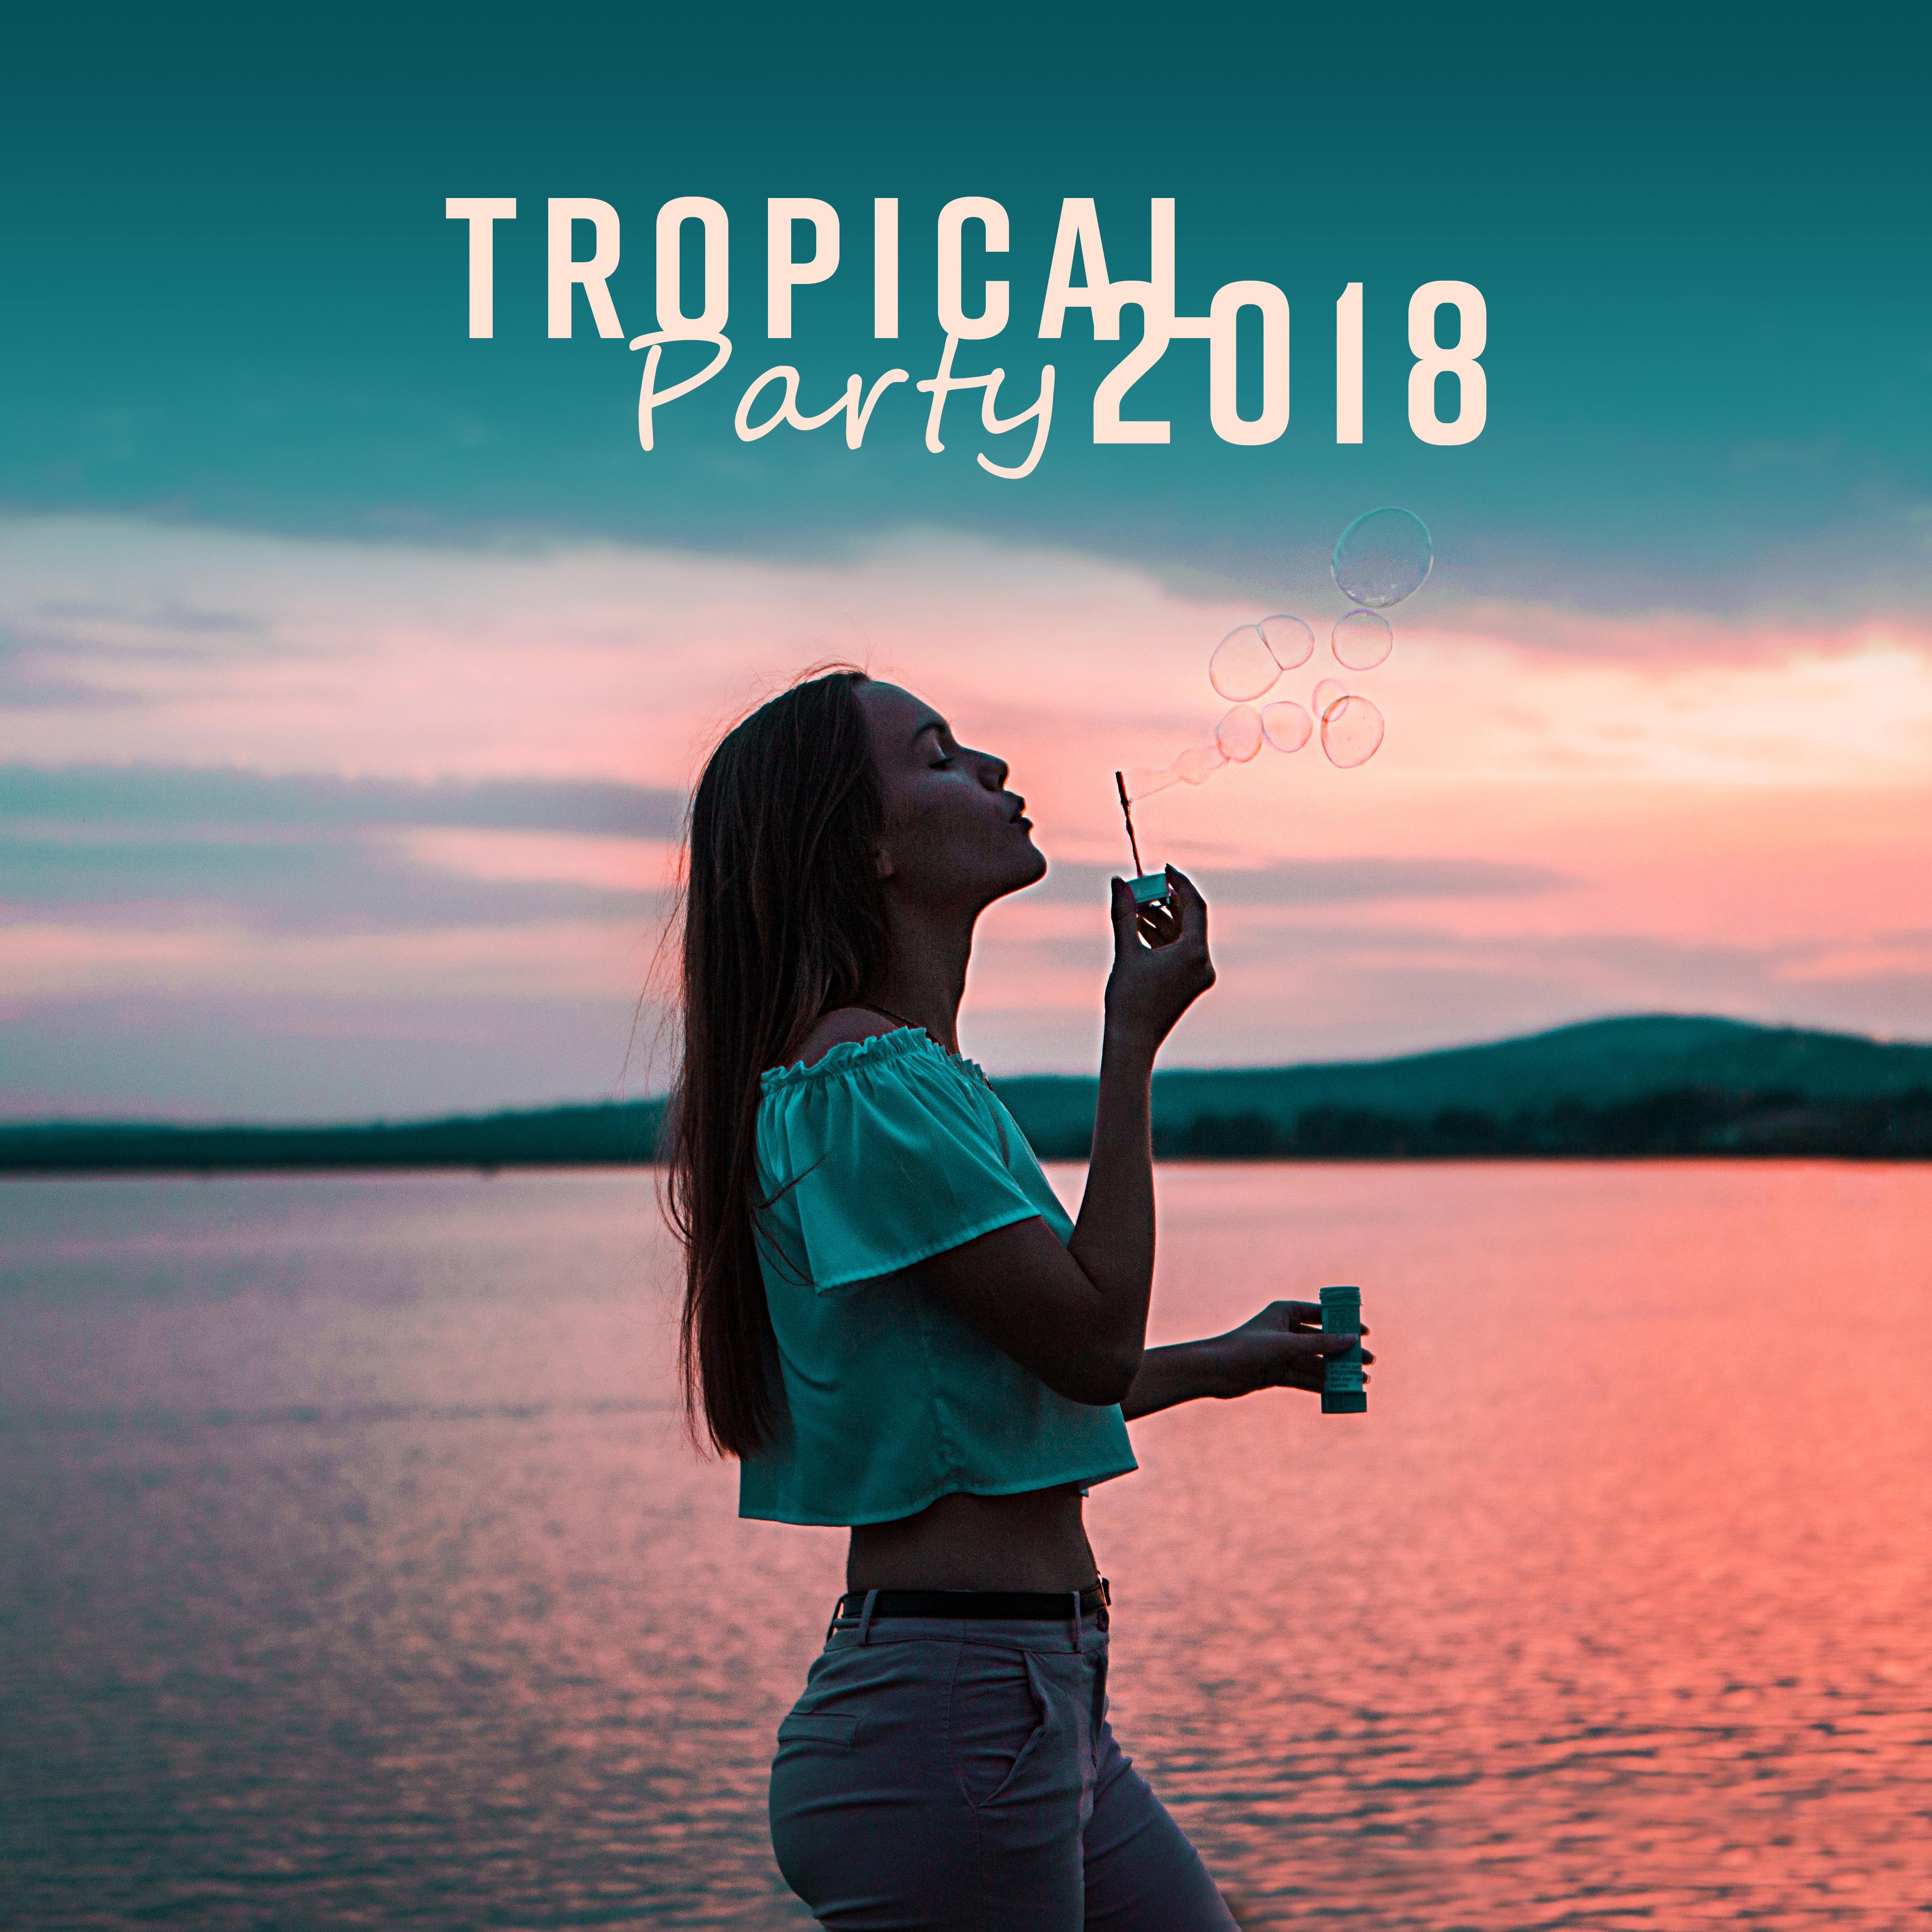 Tropical Party 2018